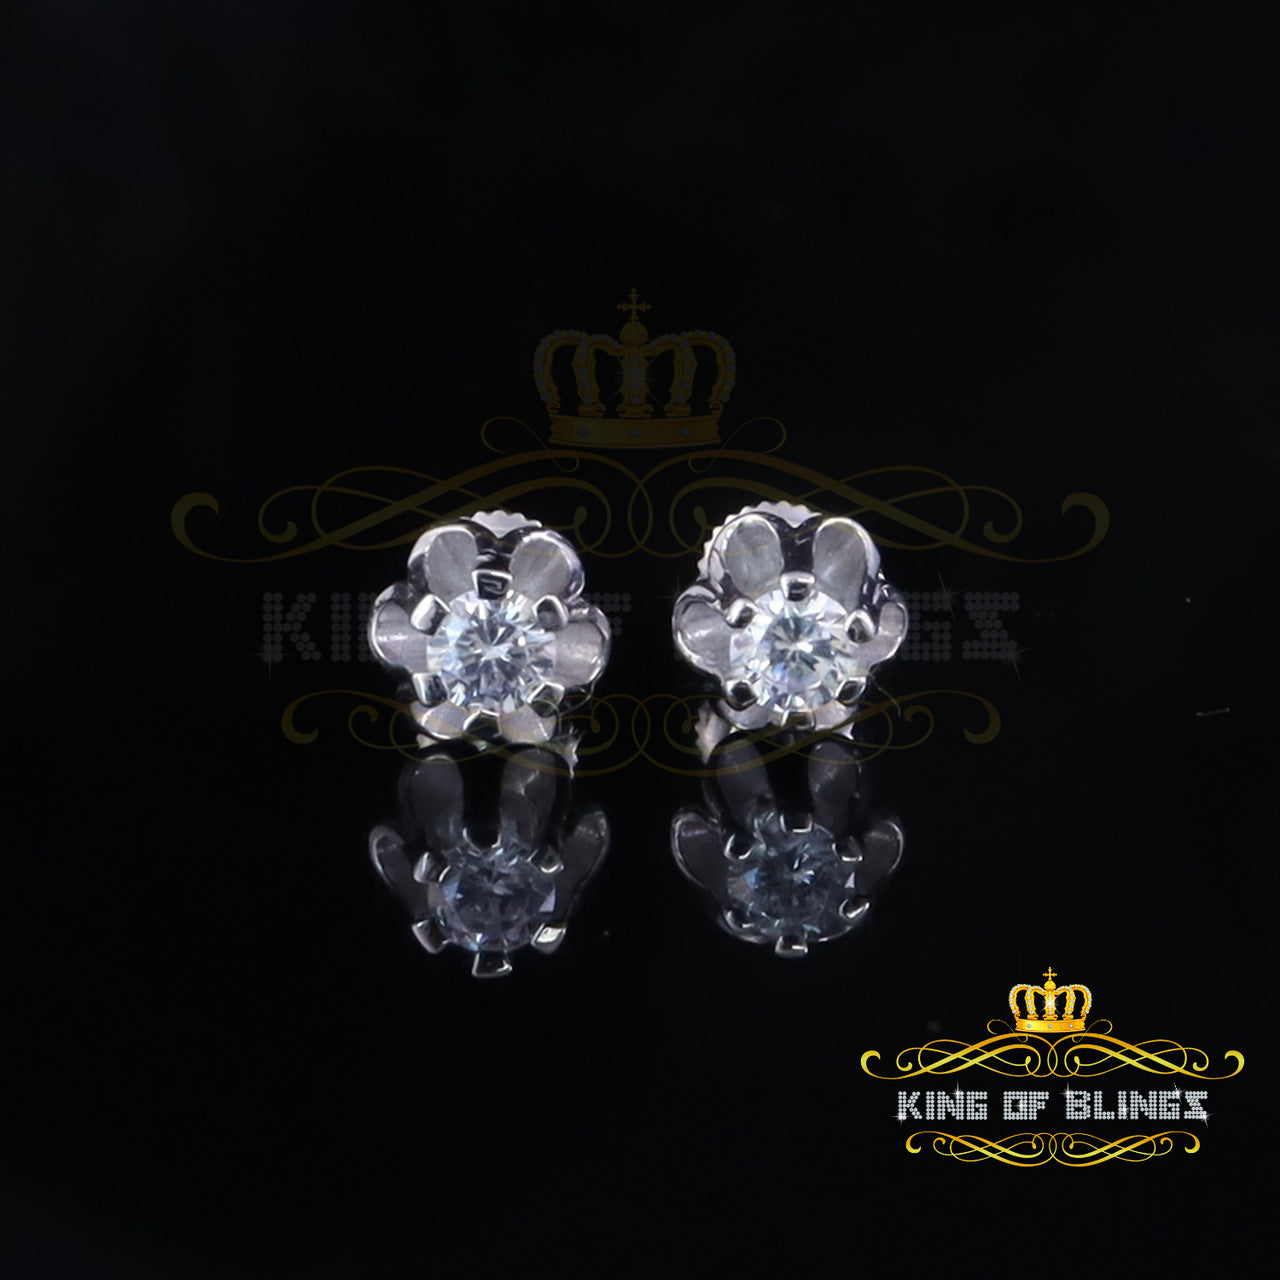 King of Bling's 0.25ct 925 Silver Cubic Zirconia White Round Shape Buttercup Stud Earrings Women